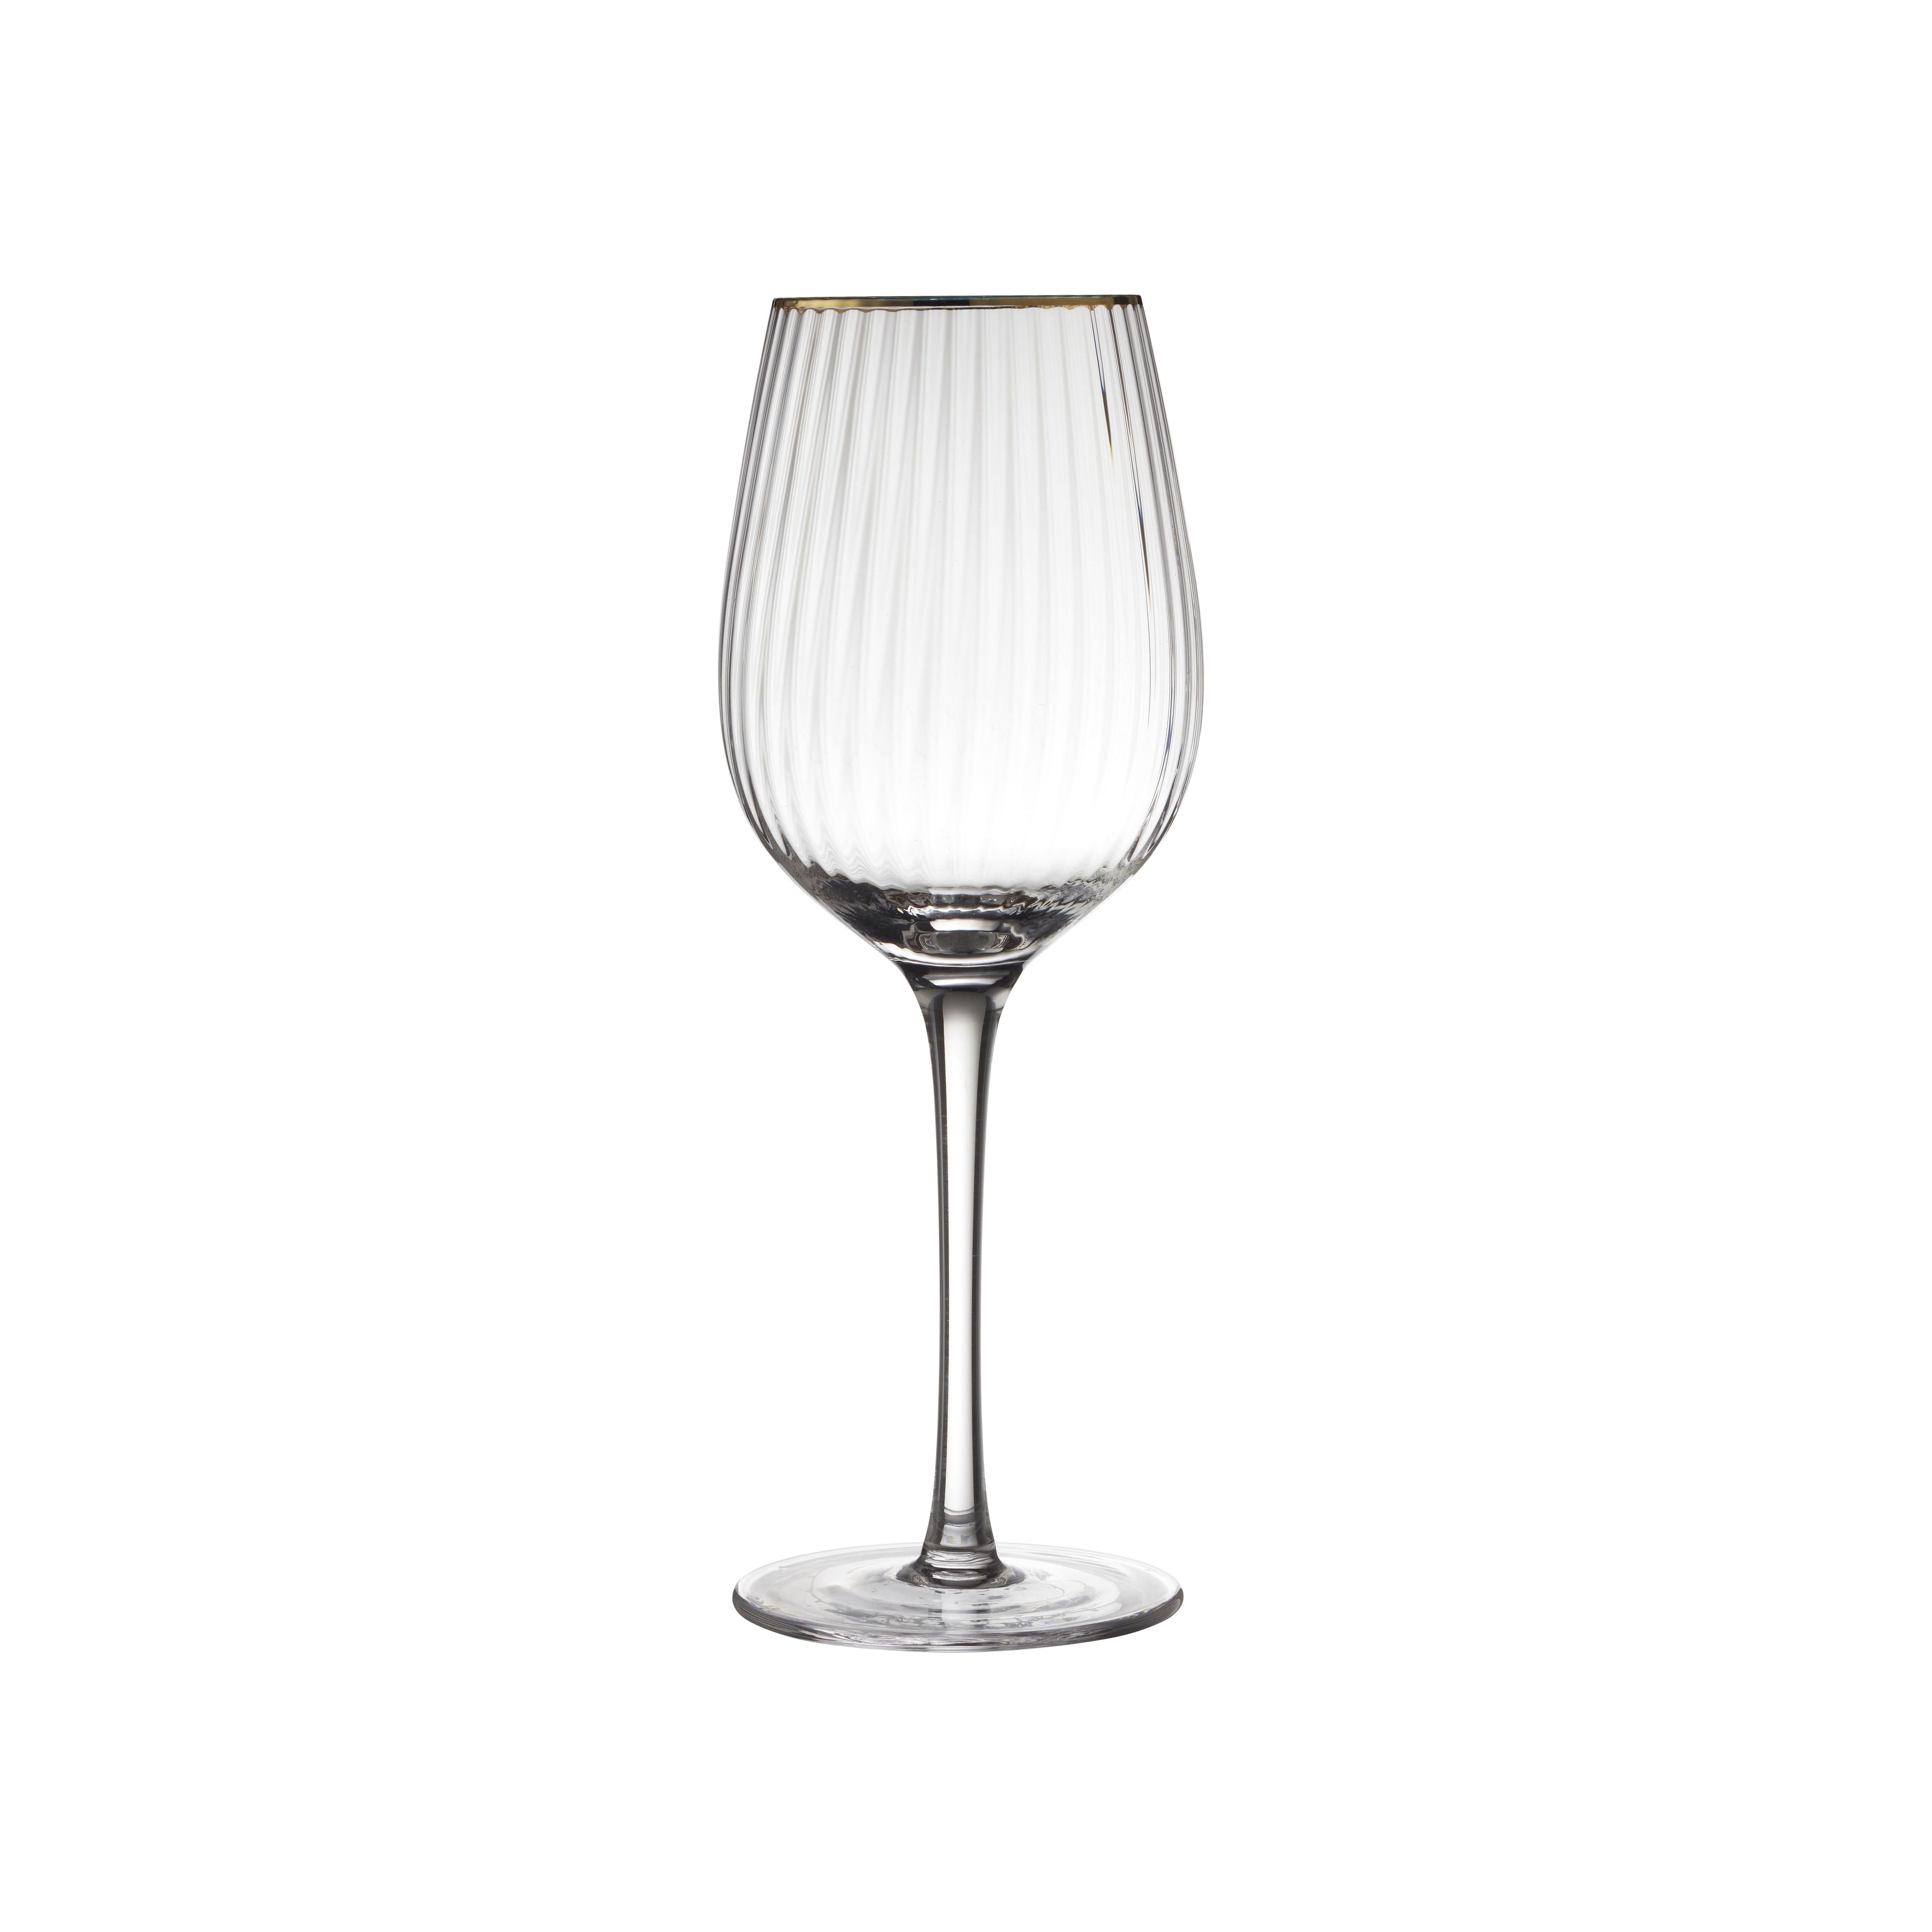 Lyngby Glas Palermo Gold Red Wine Glass 40 Cl 4 ks.